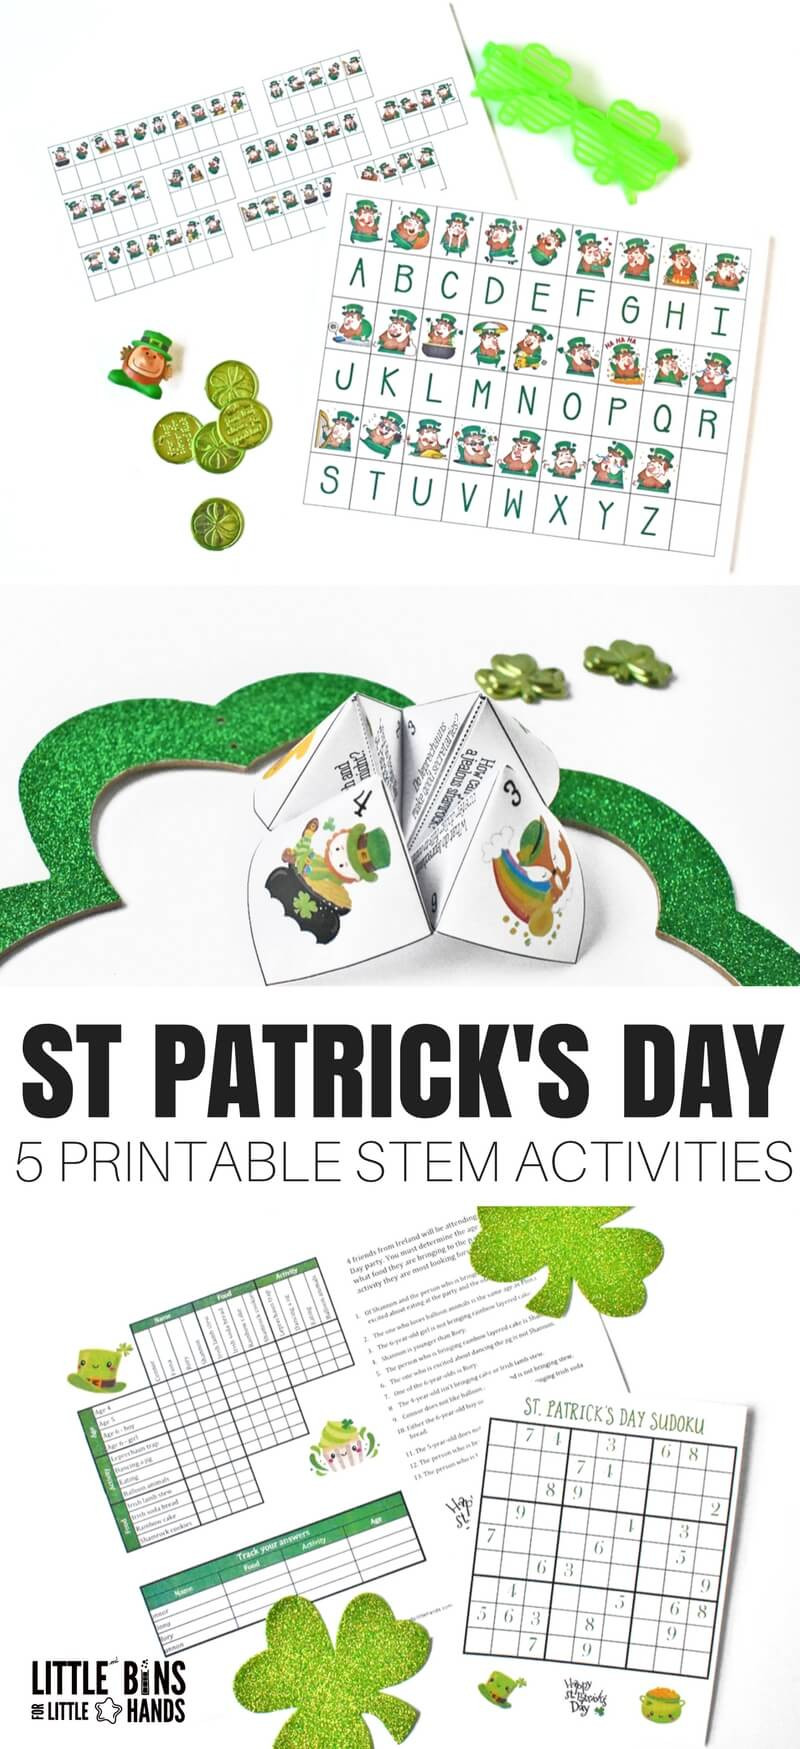 Saint Patrick's Day Activities For Elementary Students
 Printable St Patricks Day STEM Activities for Kids FREE